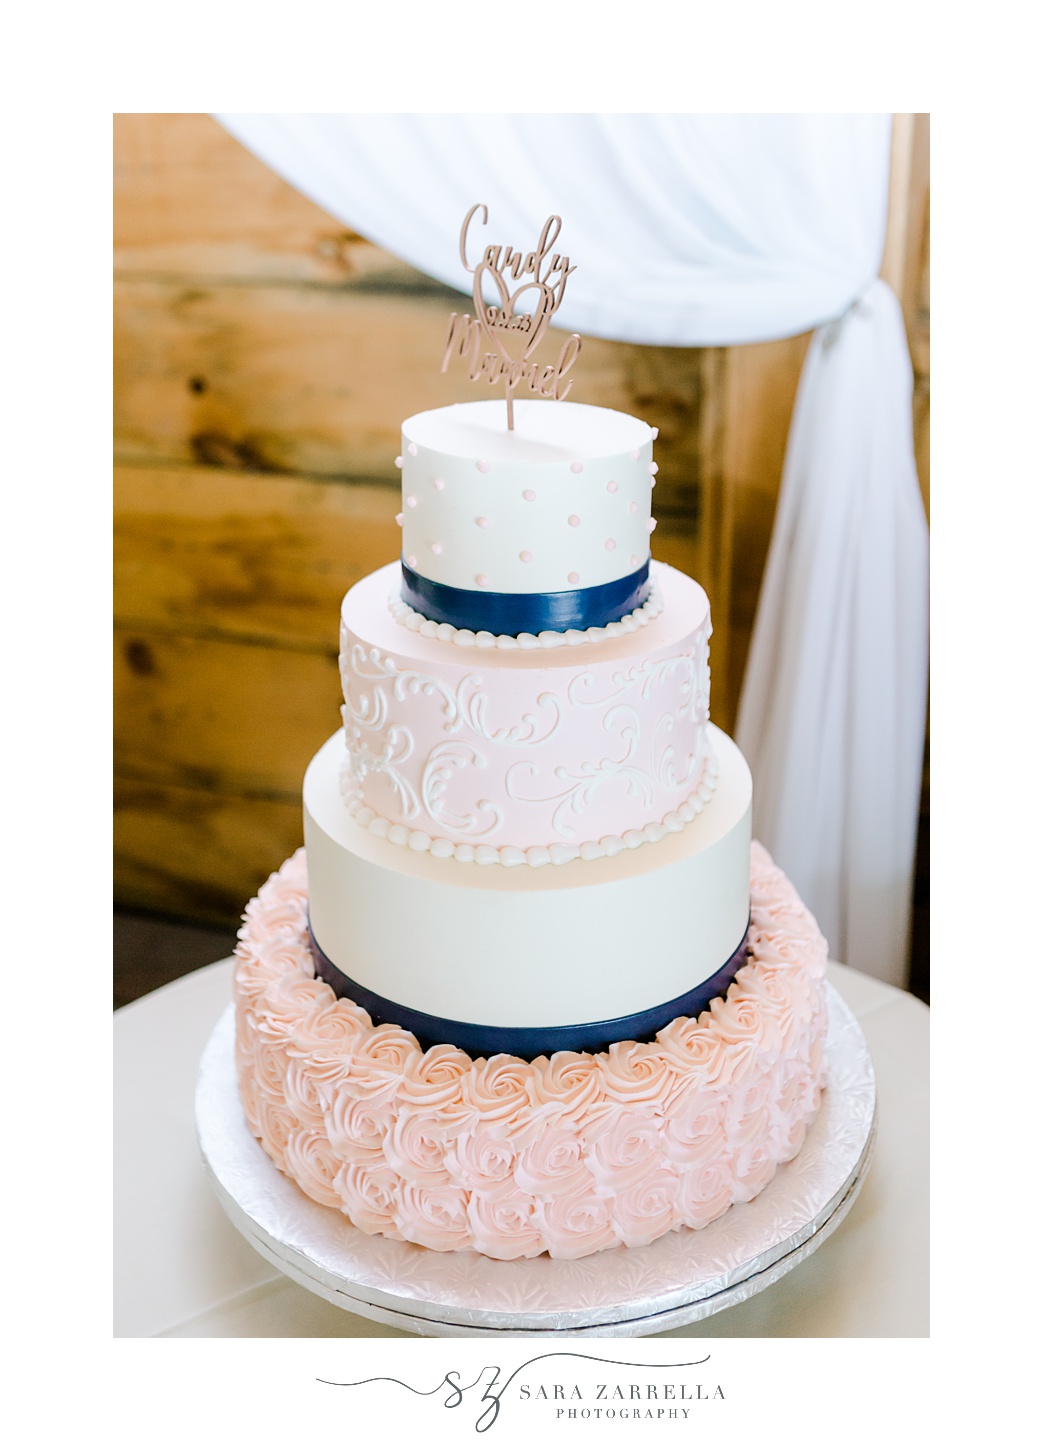 tiered wedding cake with pink icing and blue ribbon for wedding reception in the Pavilion at Blissful Meadows